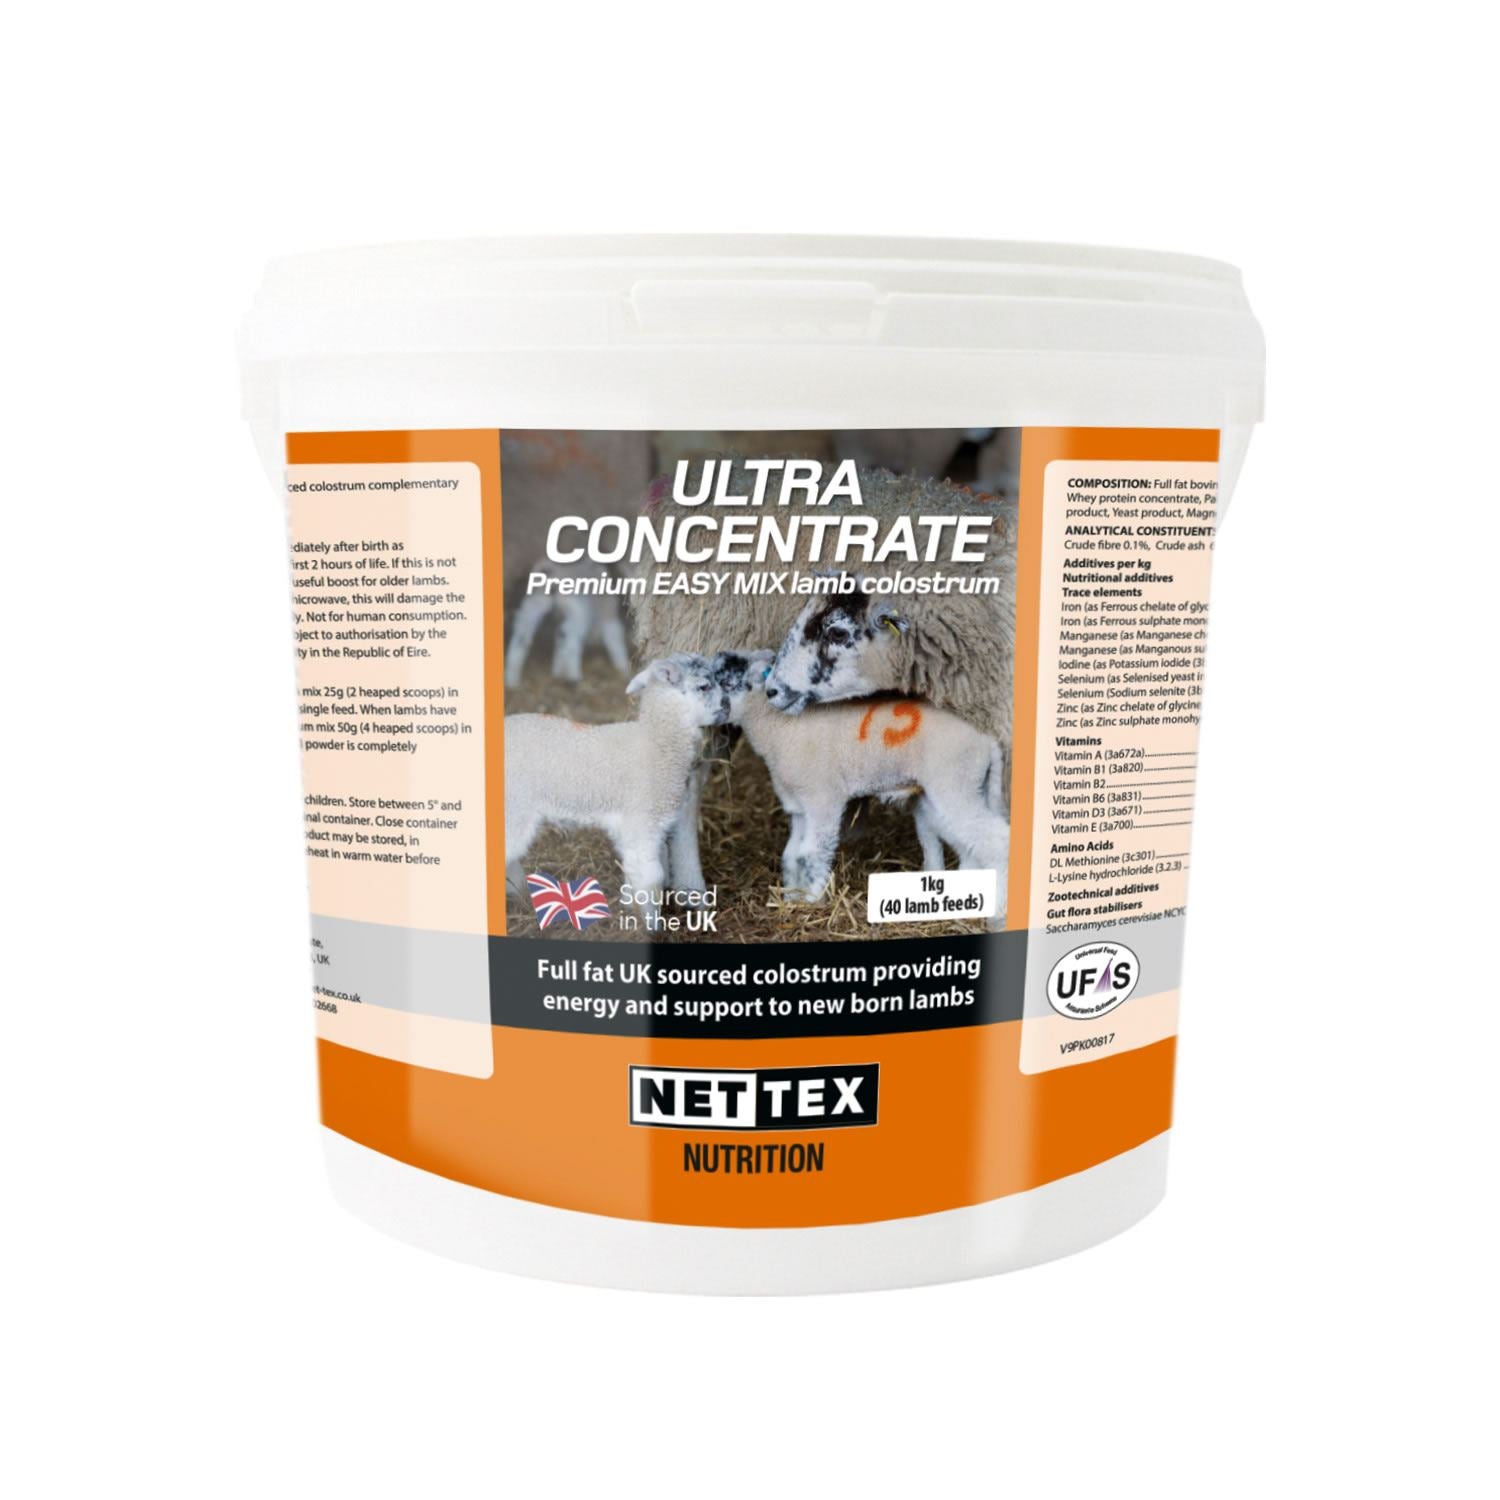 Nettex Ultra Concentrate Colostrum - Just Horse Riders